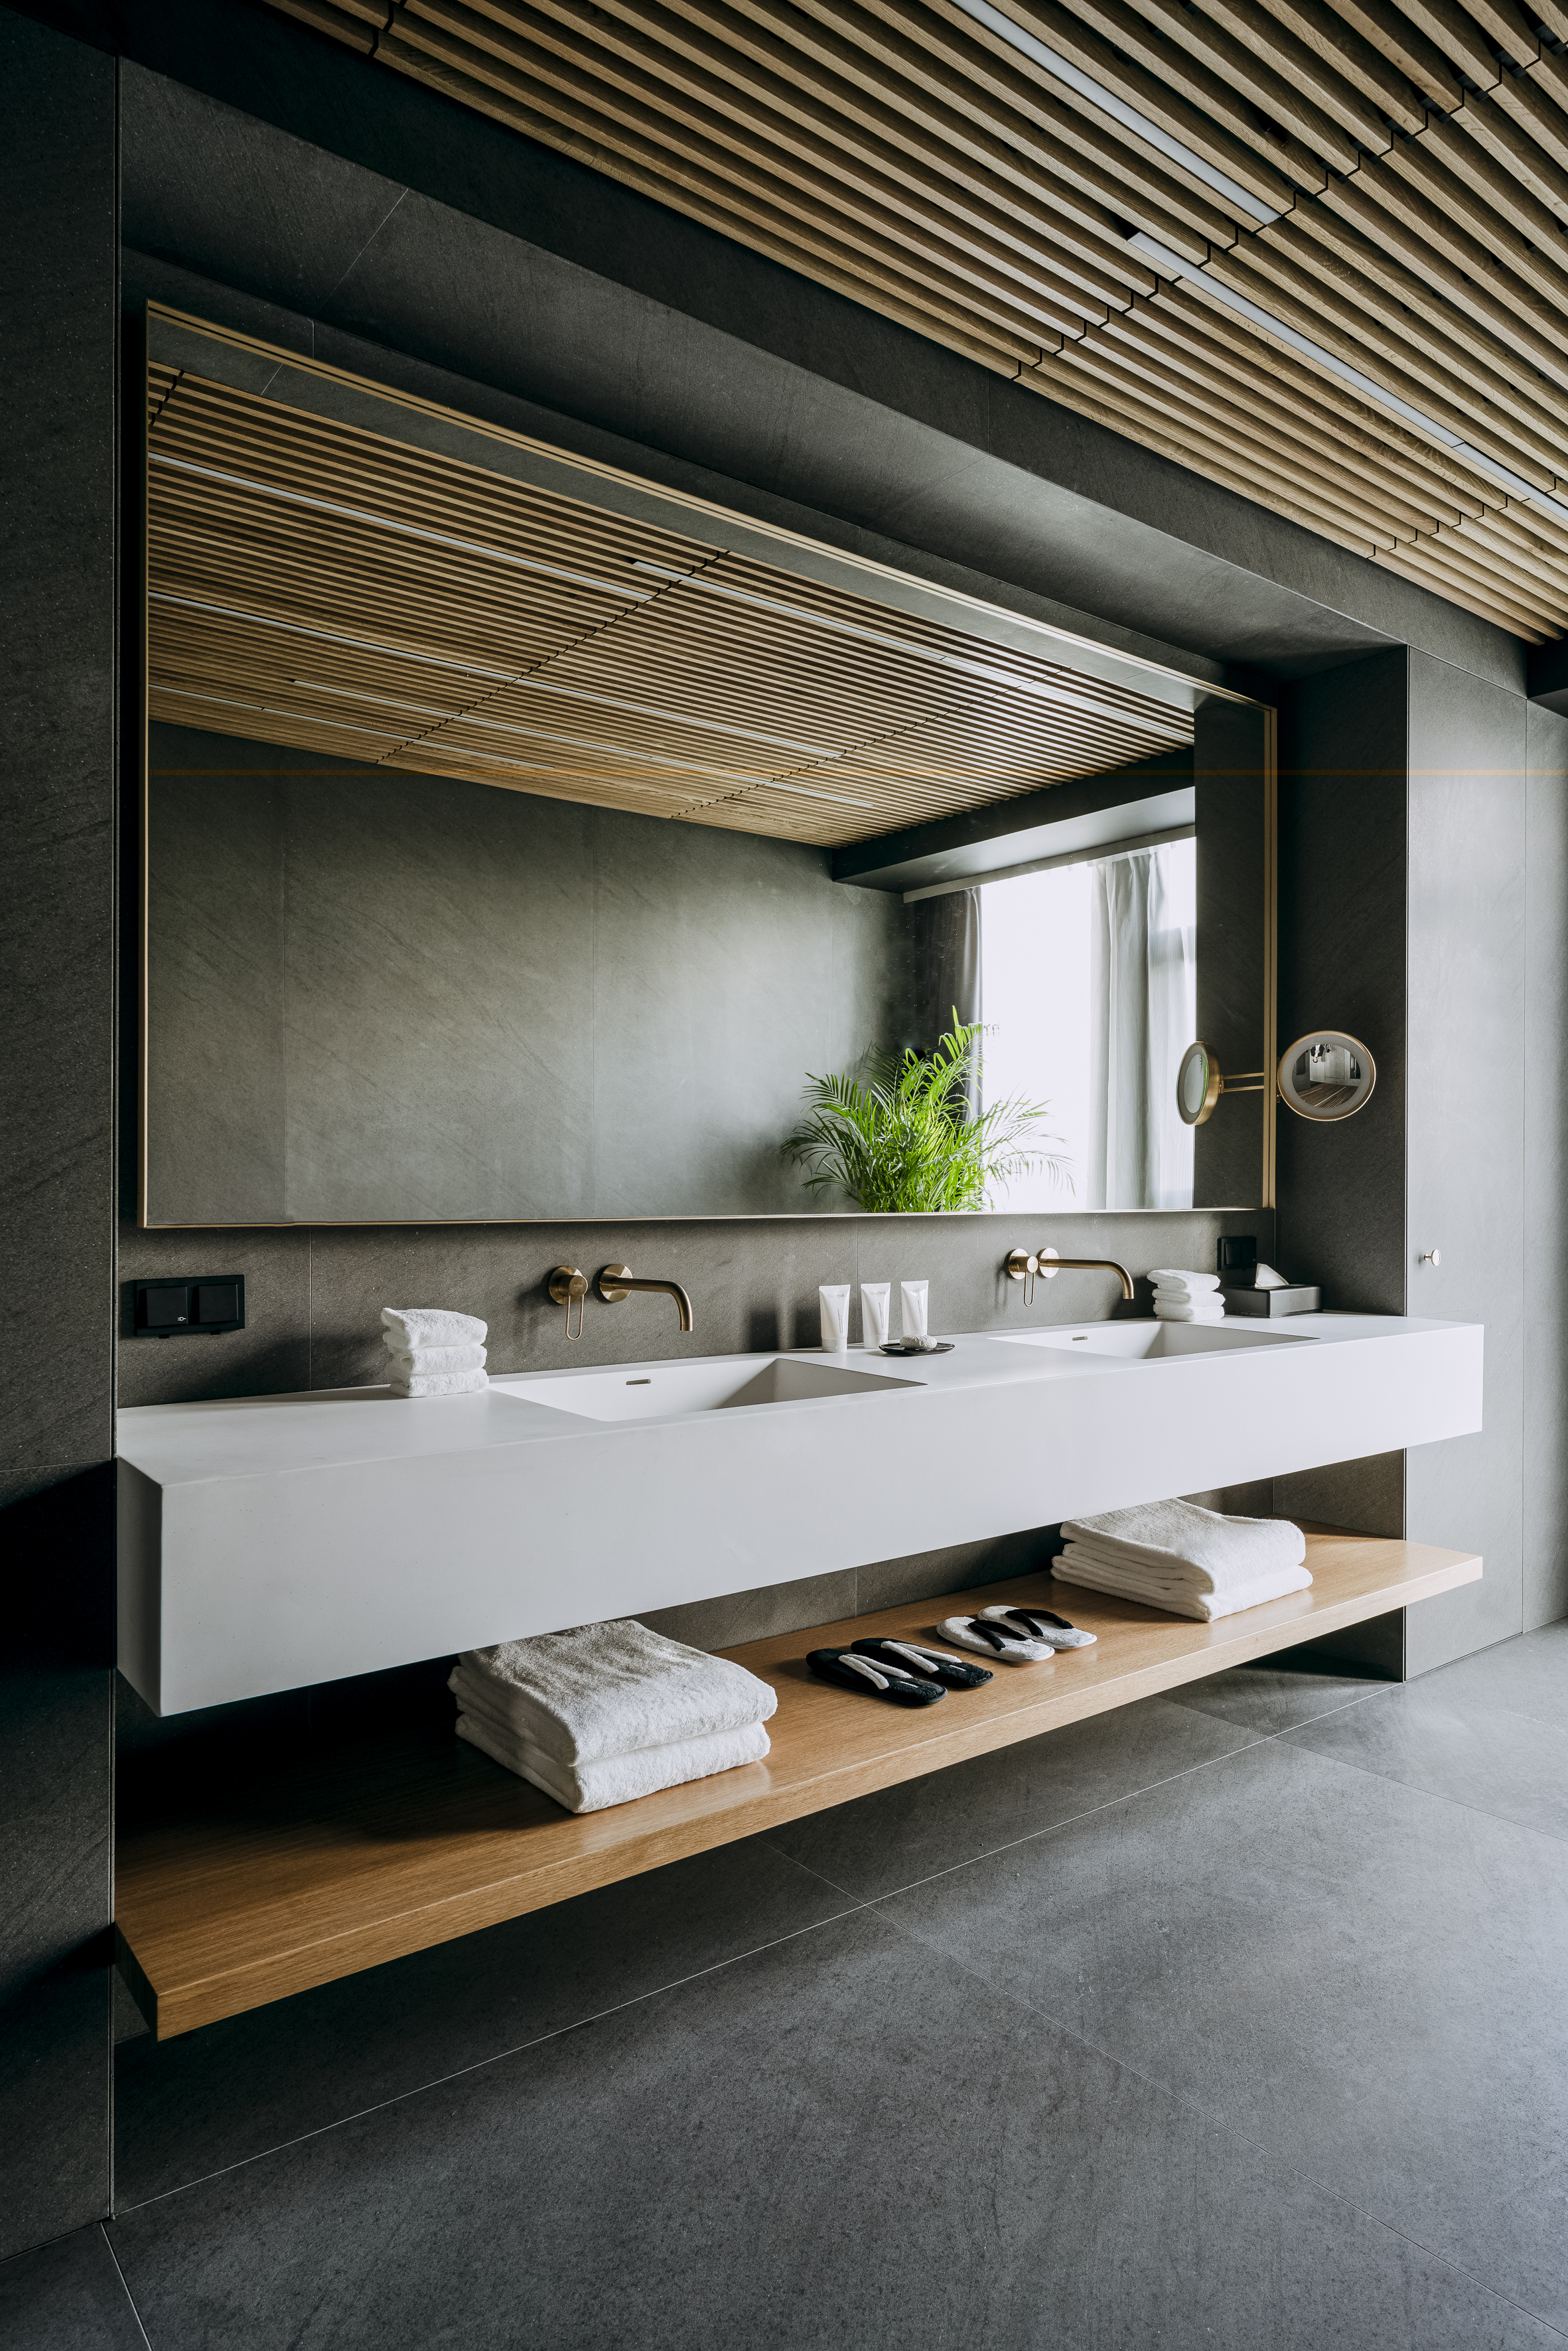 Image no. 1 of Project by Medusa Group - Wooden bathtub Puari for Nobu Warsaw